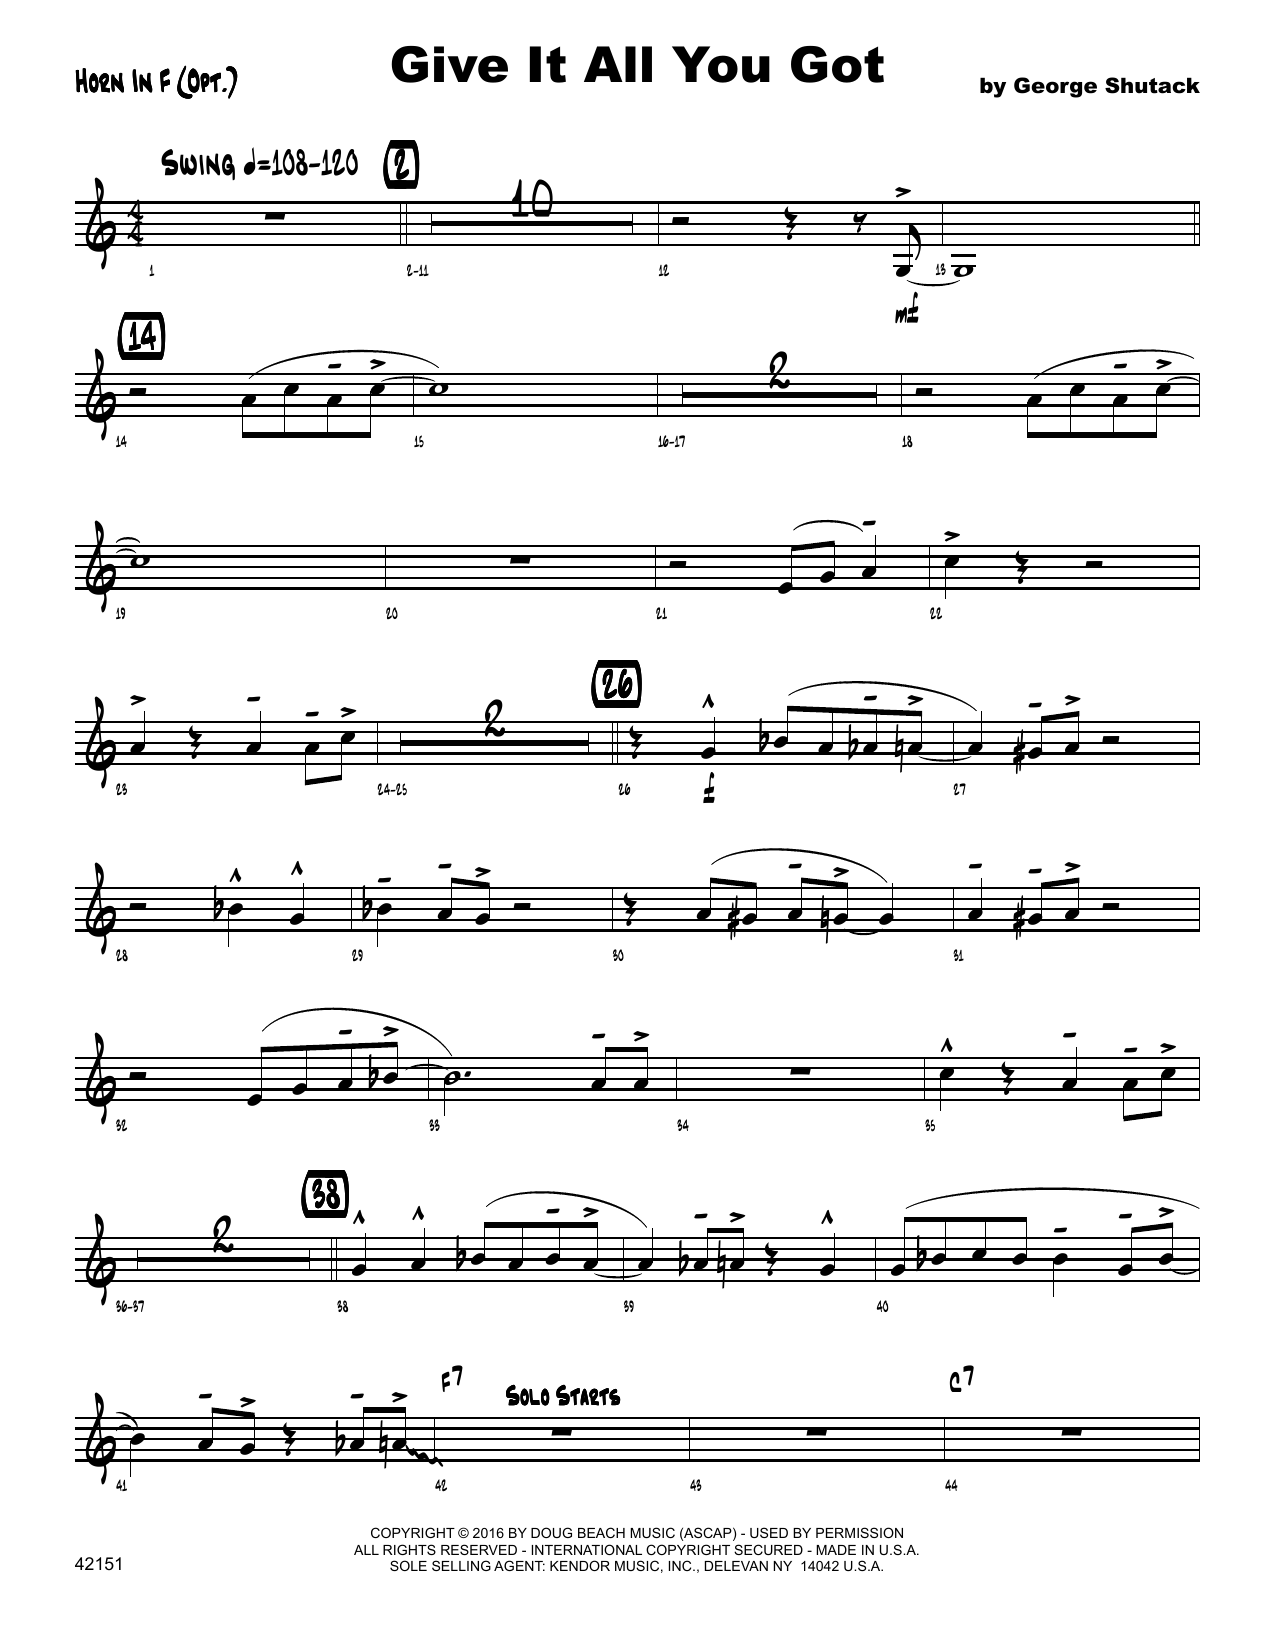 Download George Shutack Give It All You Got - Horn in F Sheet Music